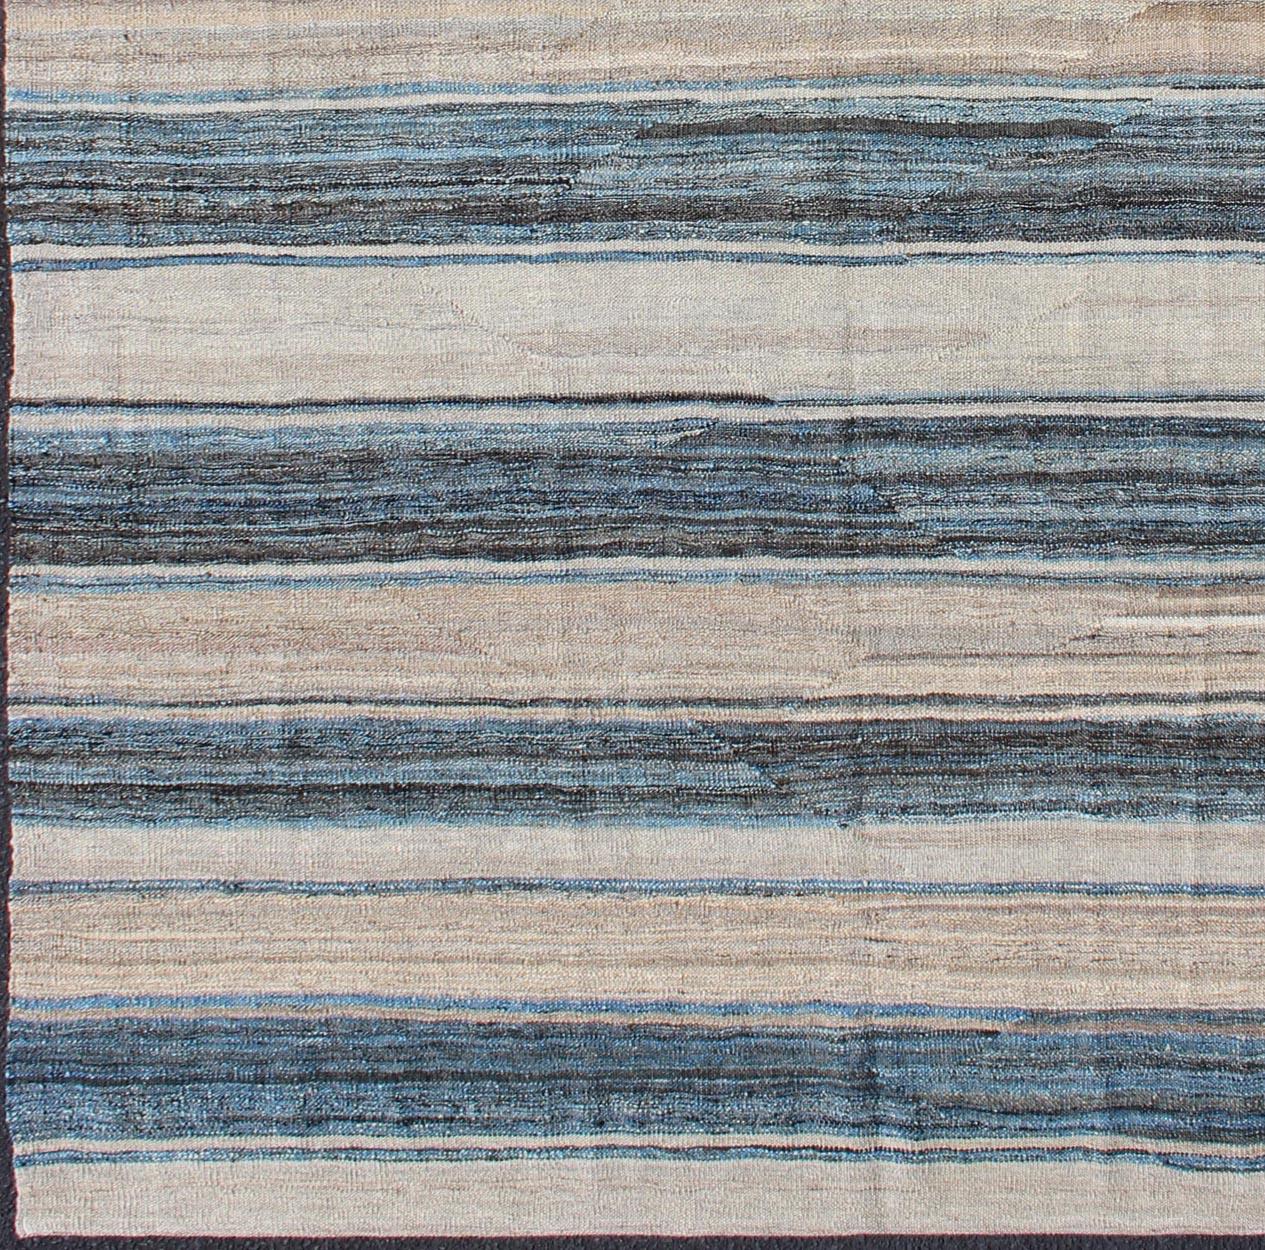 Afghan Flat-Weave Modern Kilim Rug with Stripes in Shades of Blue, Charcoal and Ivory For Sale